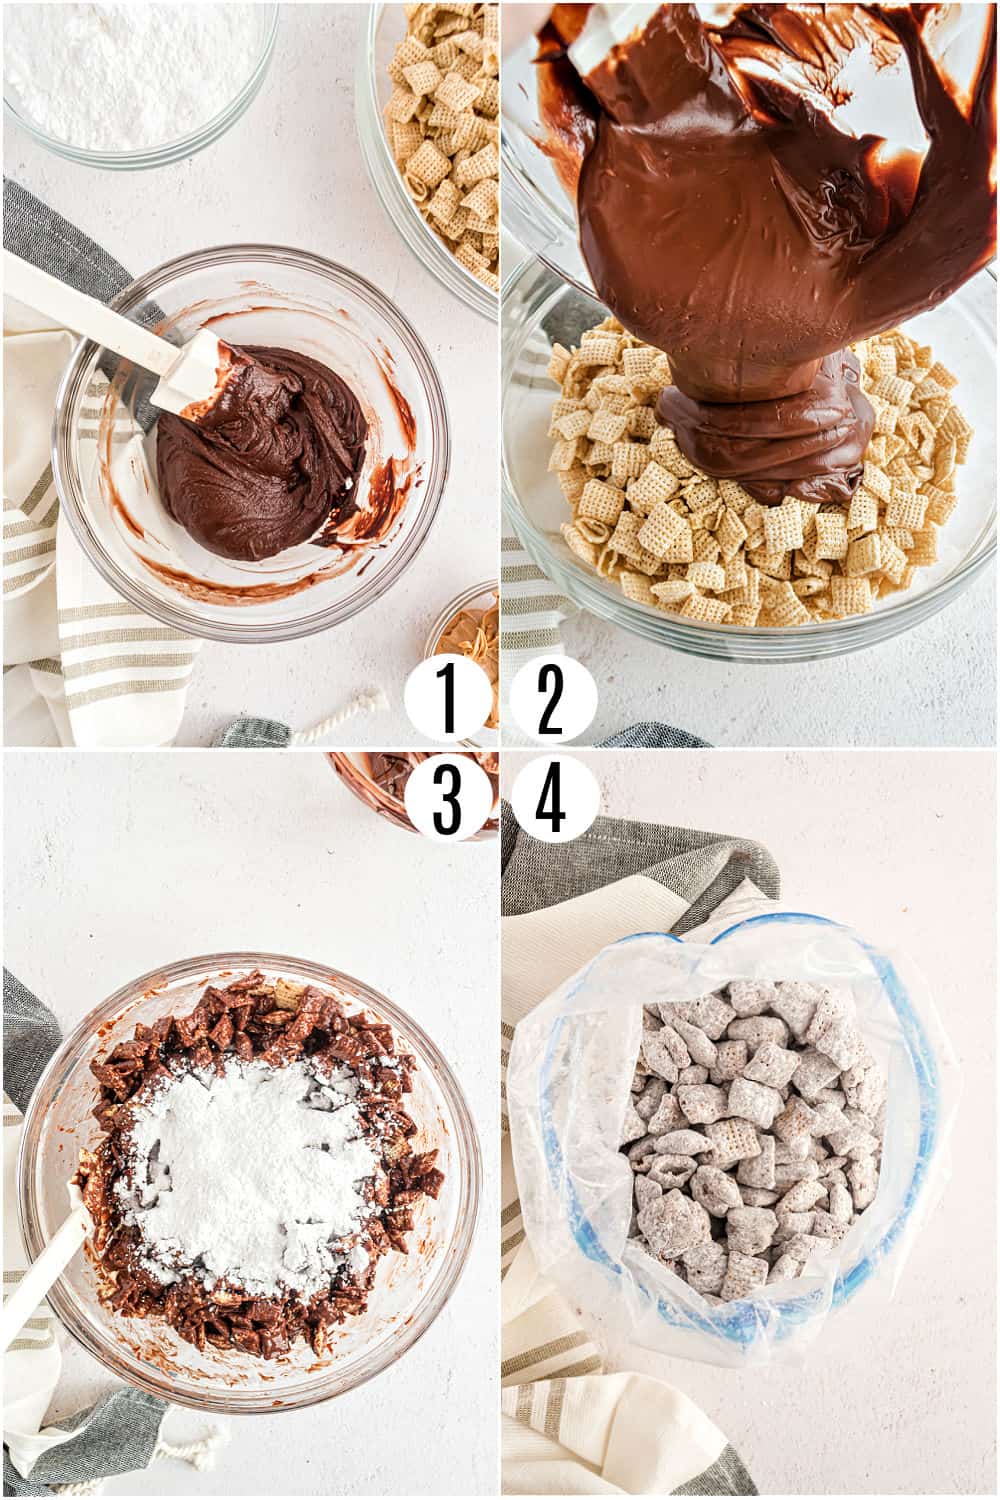 Step by step photos showing how to make puppy chow, muddy buddies.